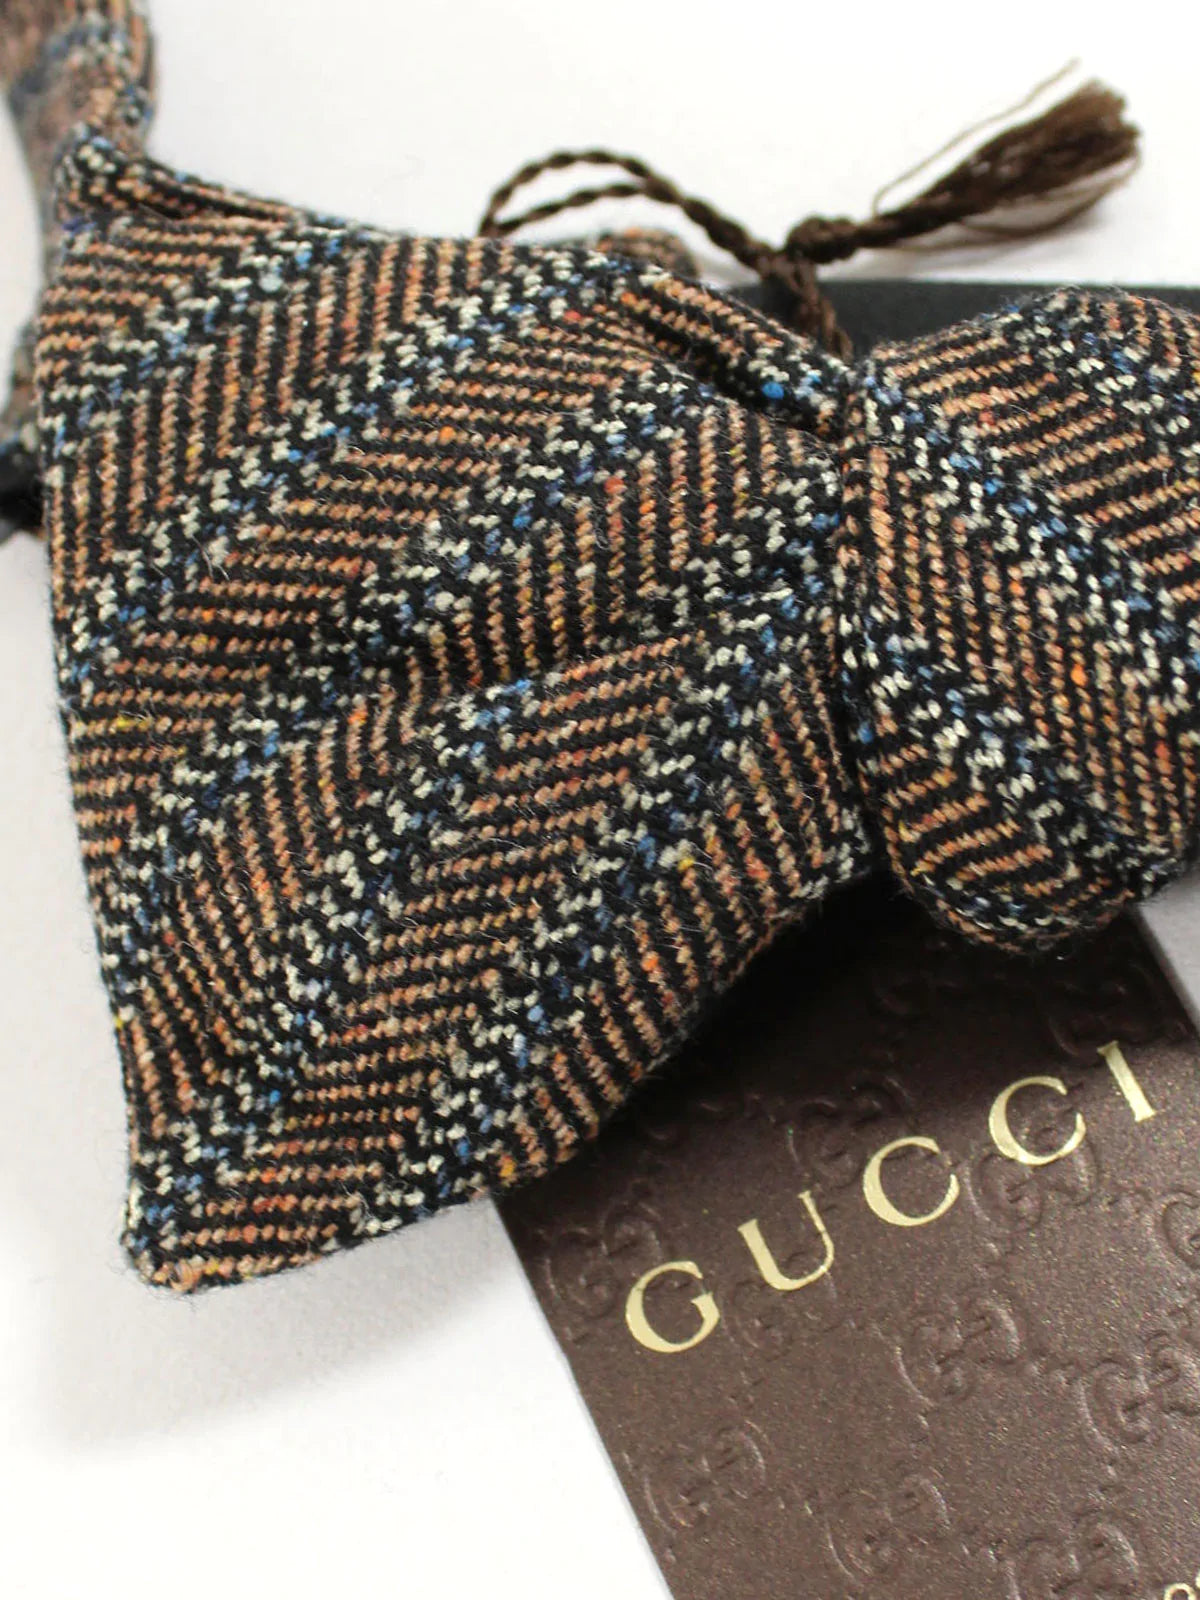 Gucci Bow Tie Charcoal Gray Olive Stripes - Self Tie Bow Tie Final Sale